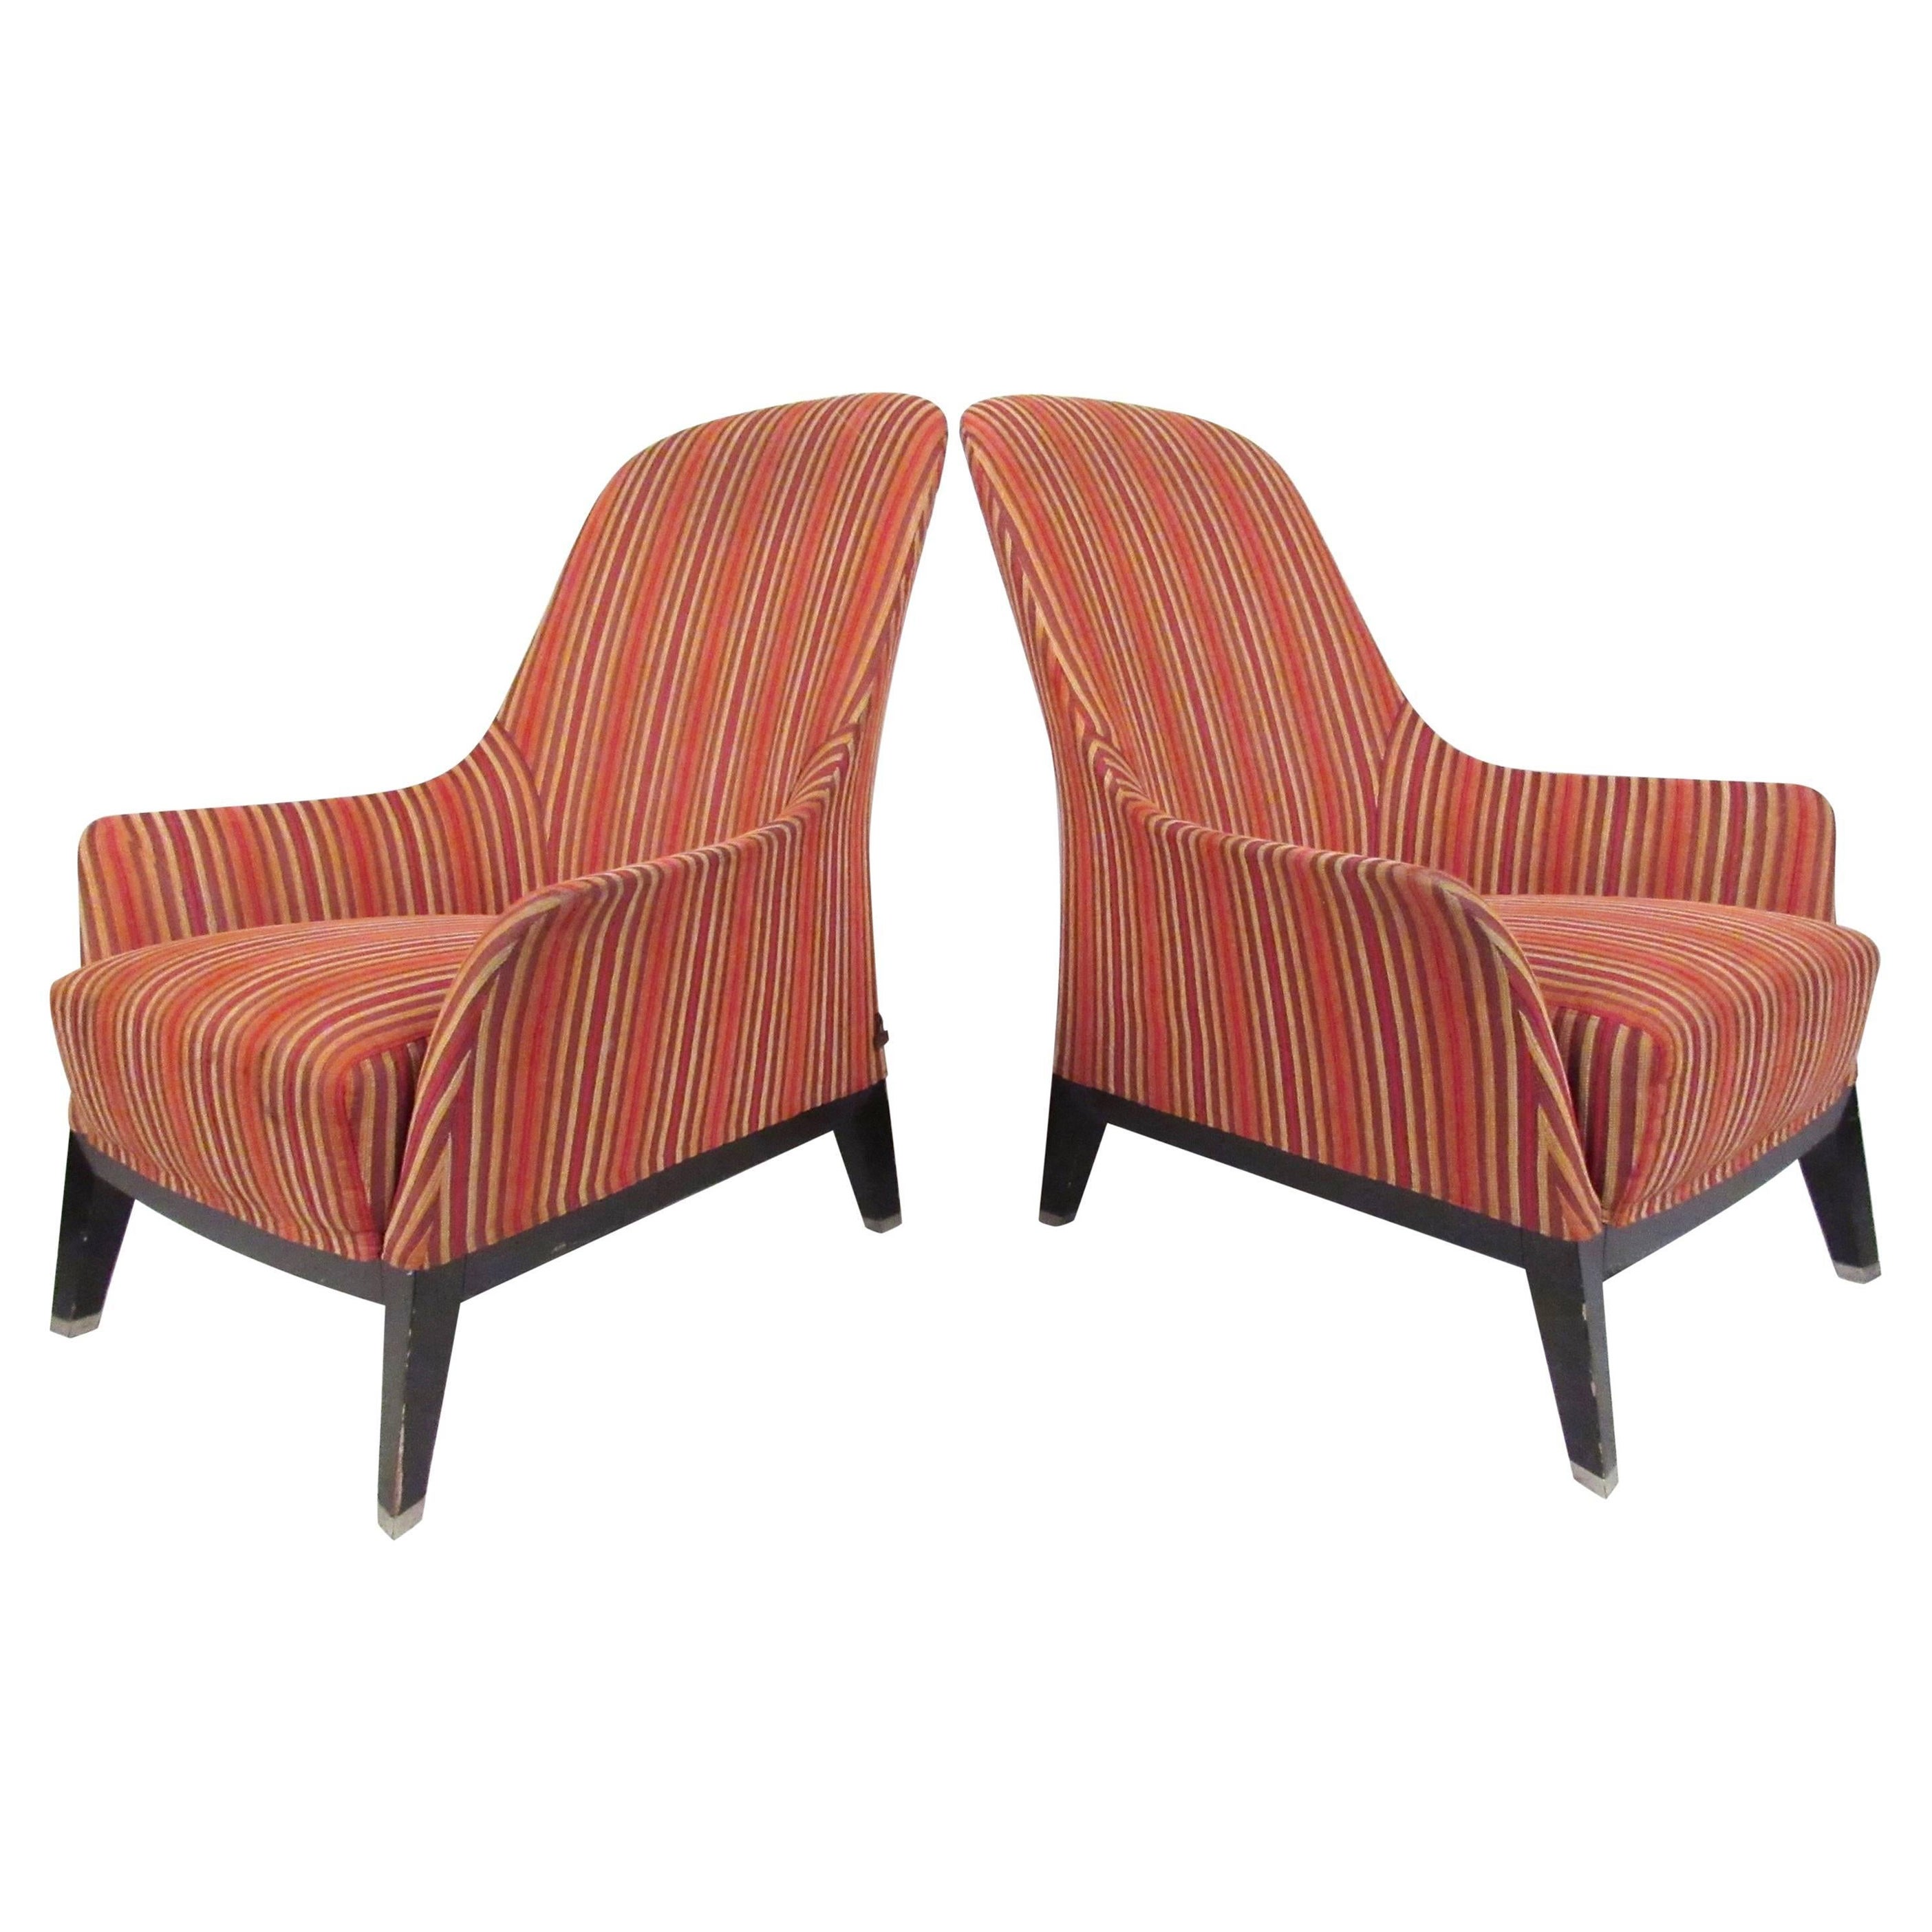 Pair of Italian Lounge Chairs by Massimo Scolari for Giorgetti For Sale